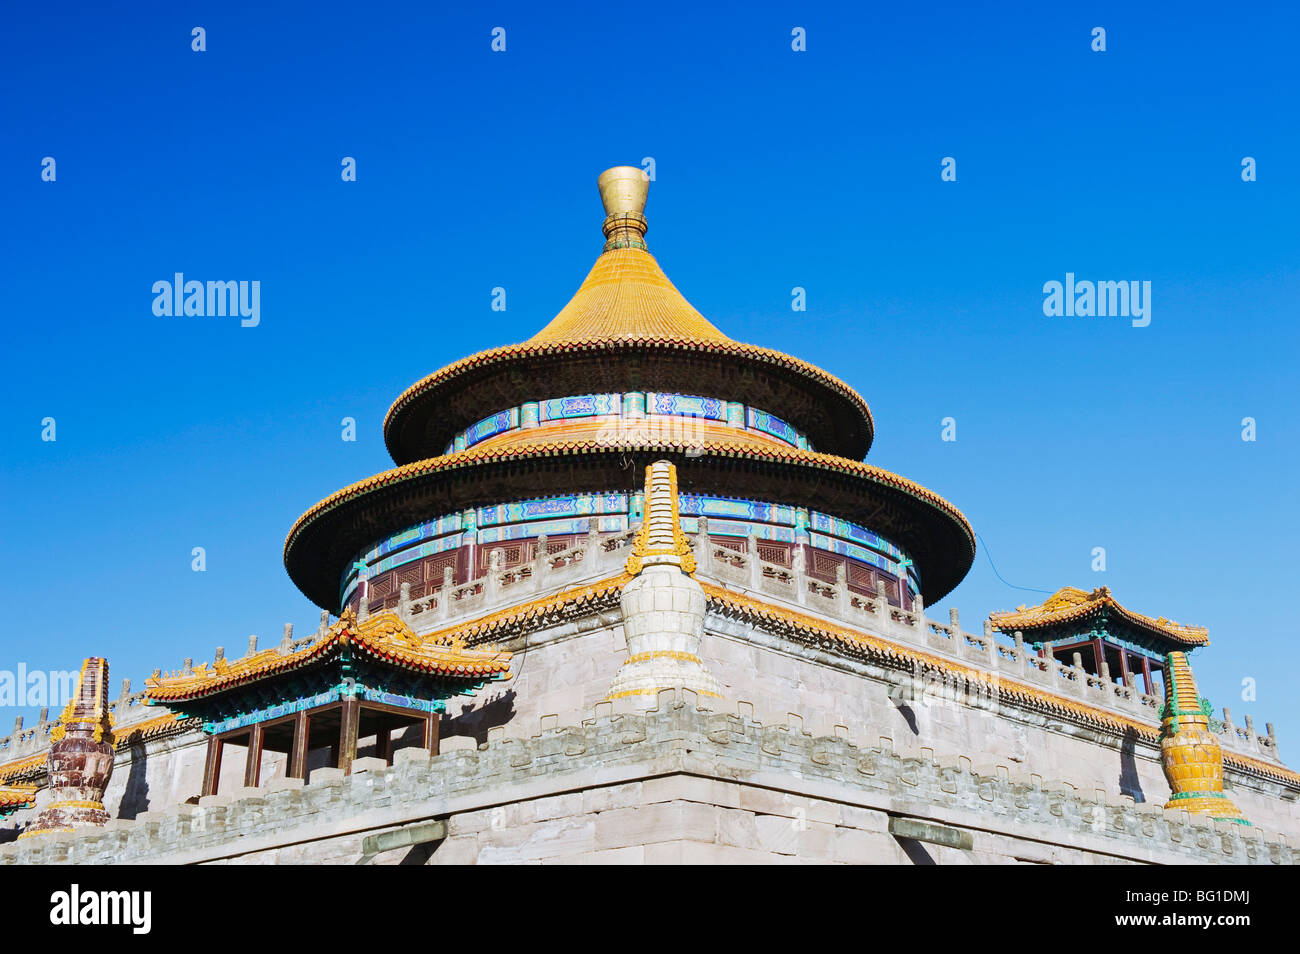 Pule Si outer temple dating from 1776, Chengde city, UNESCO World Heritage Site, Hebei Province, China, Asia Stock Photo